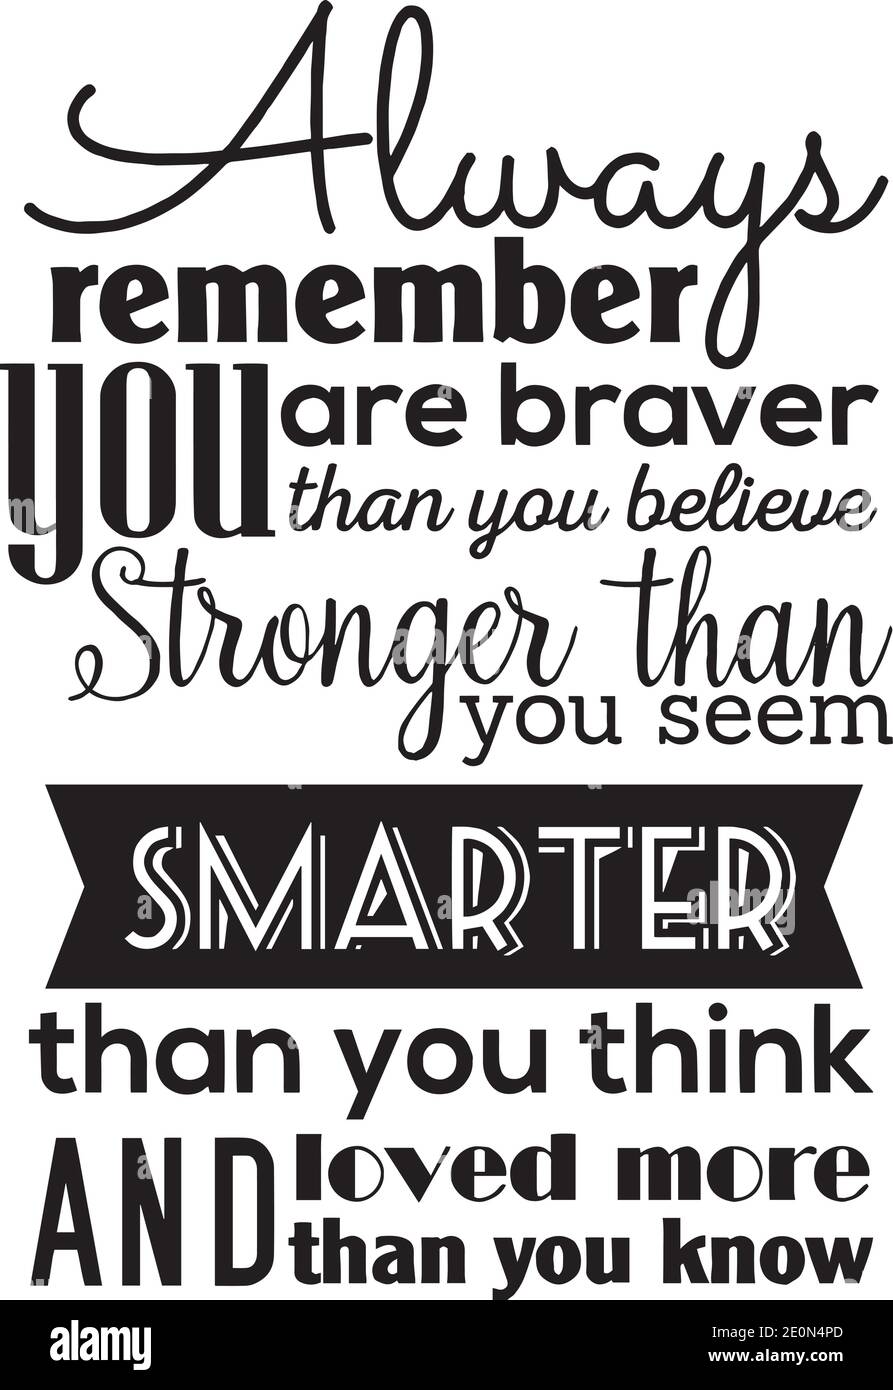 Always Remember You Are Braver Than You Believe, Stronger Than You Seem, Smarter Than You Think And Loved More Than You Know Inspirational Quotes Stock Vector Image & Art - Alamy